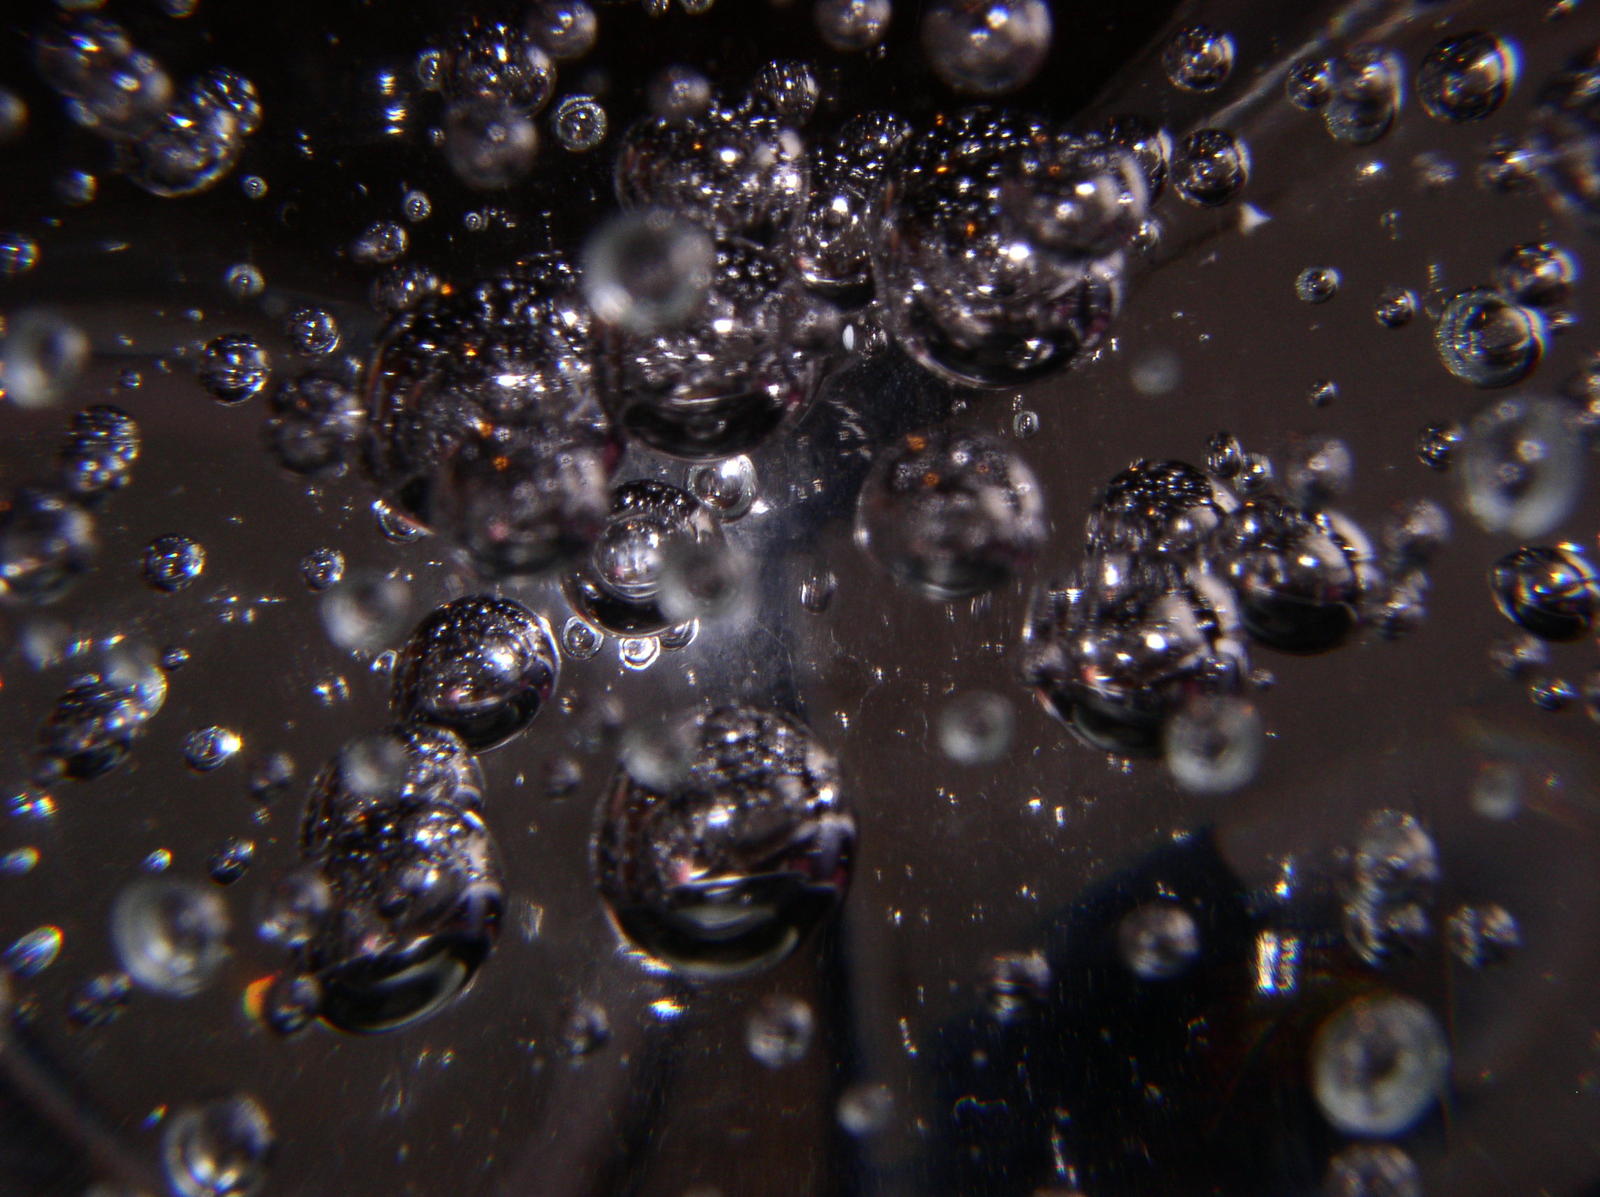 bubbles are arranged in front of a black background